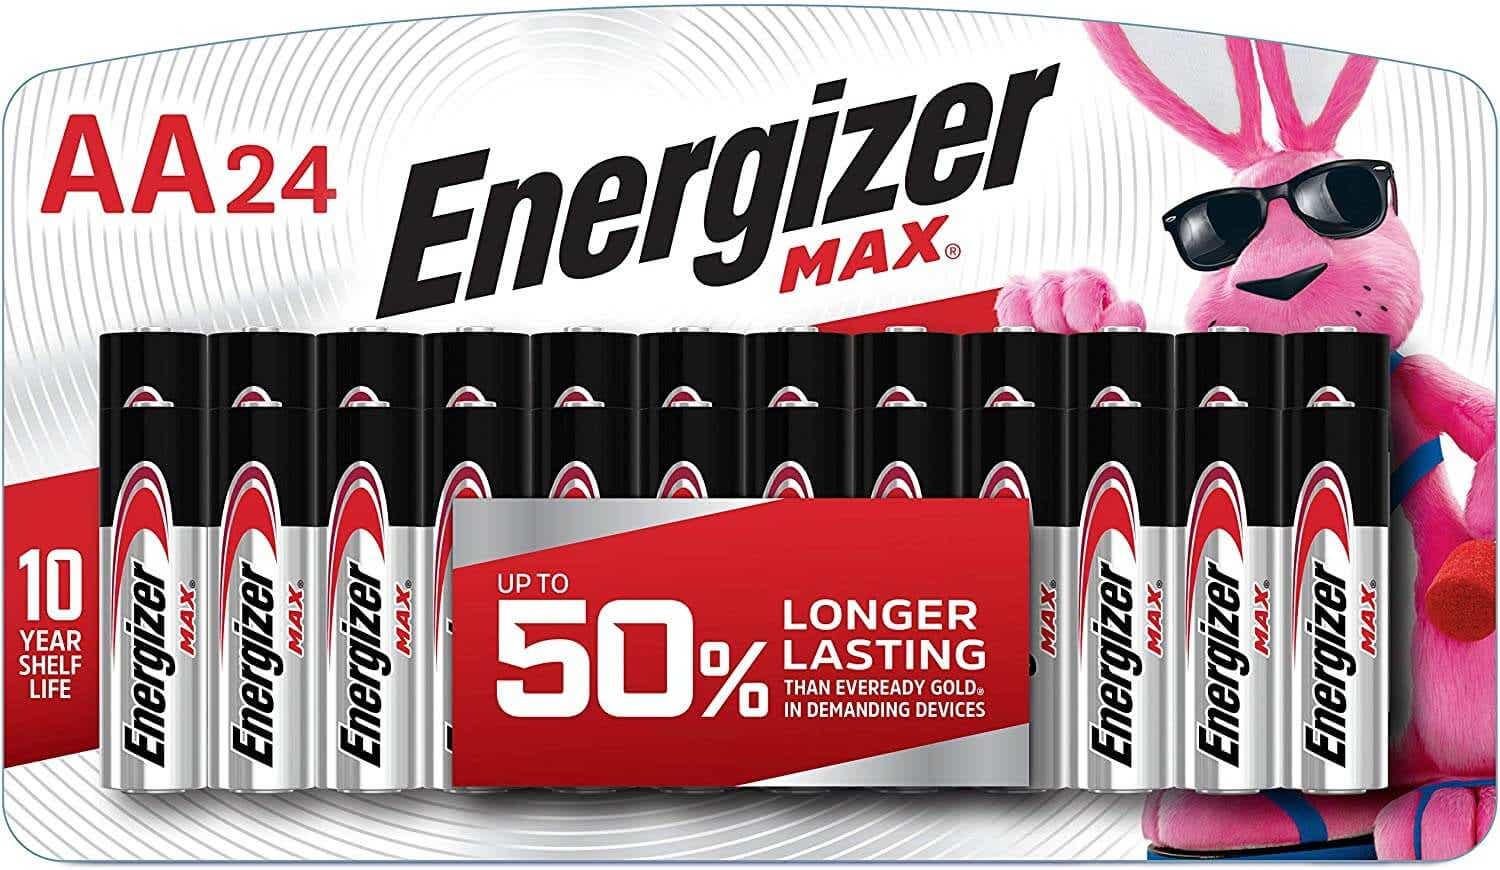 24 pack of energizer batteries